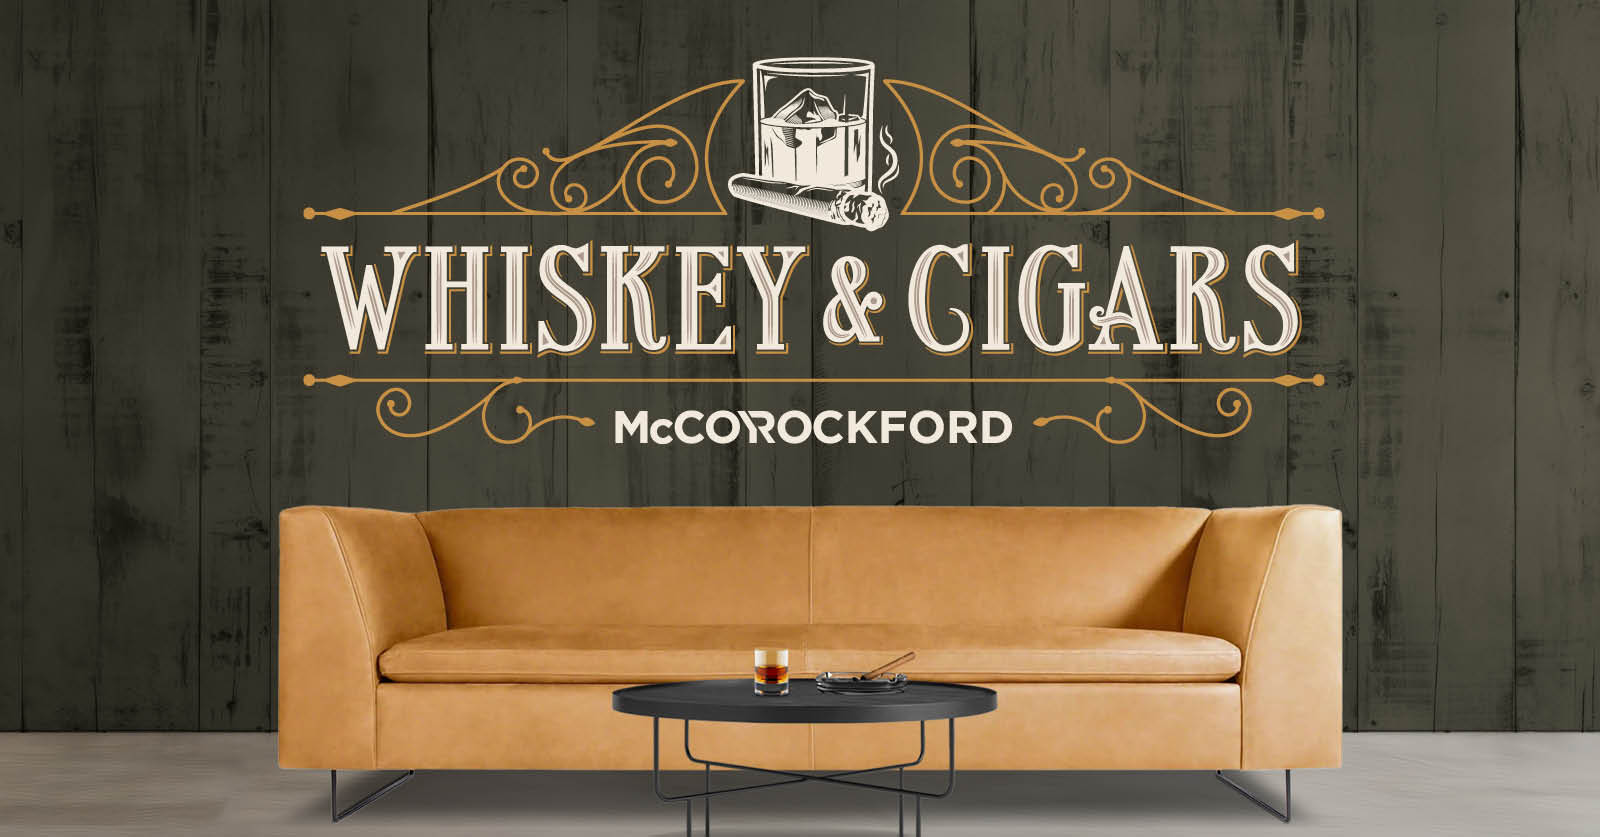 Tan leather sofa against green wall with Whiskey & Cigars logos